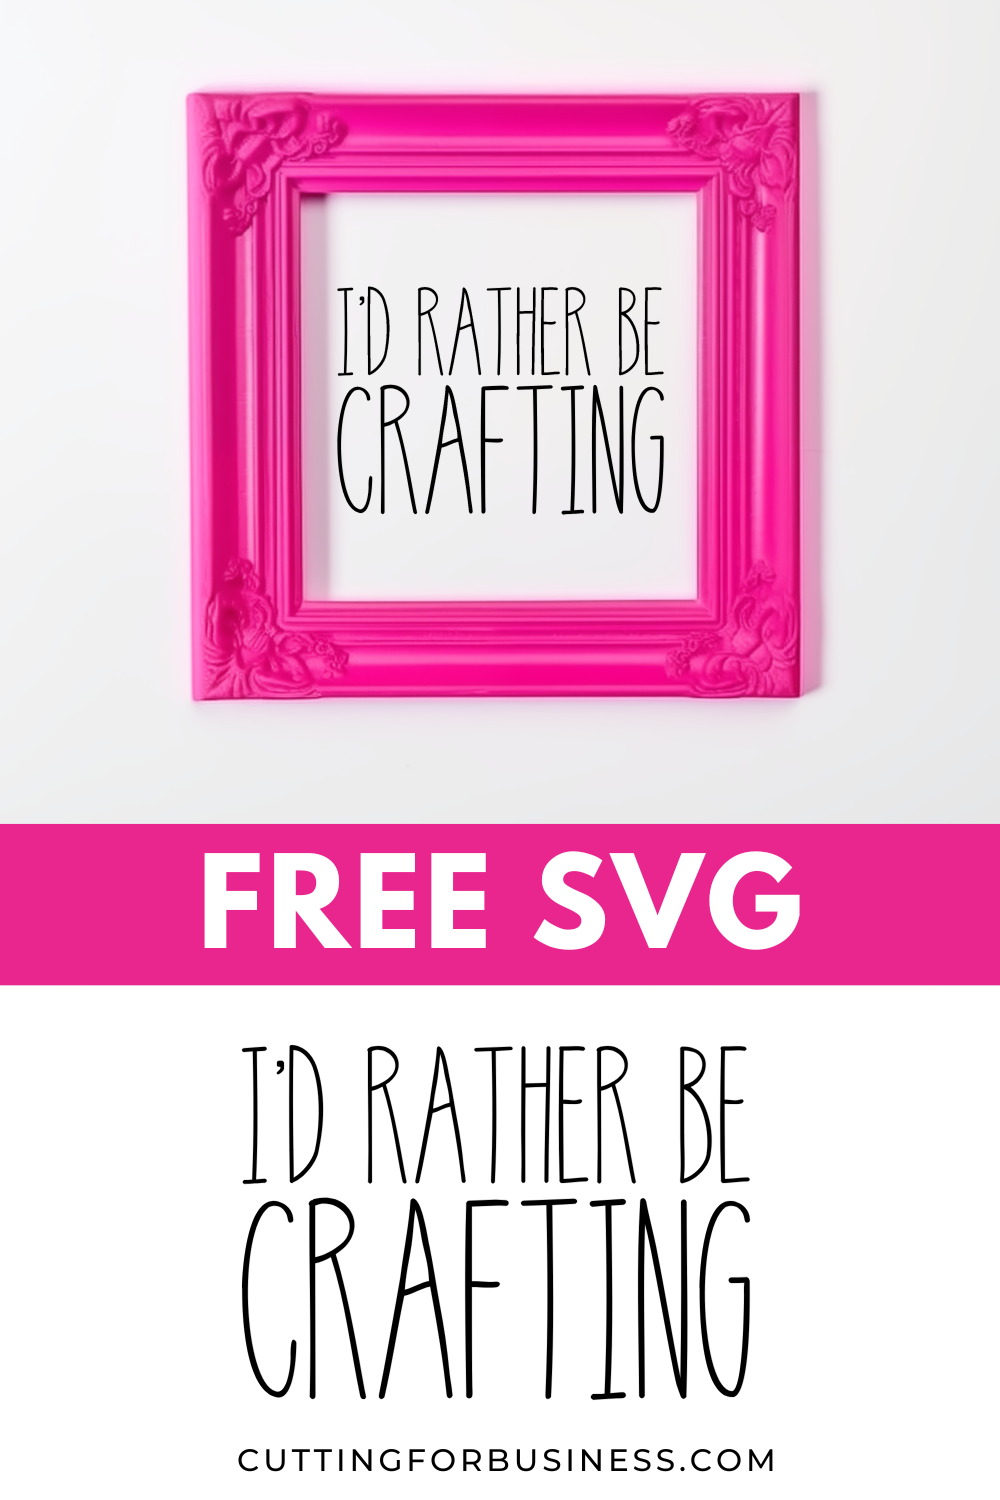 Free SVG - I'd Rather Be Crafting - cuttingforbusiness.com